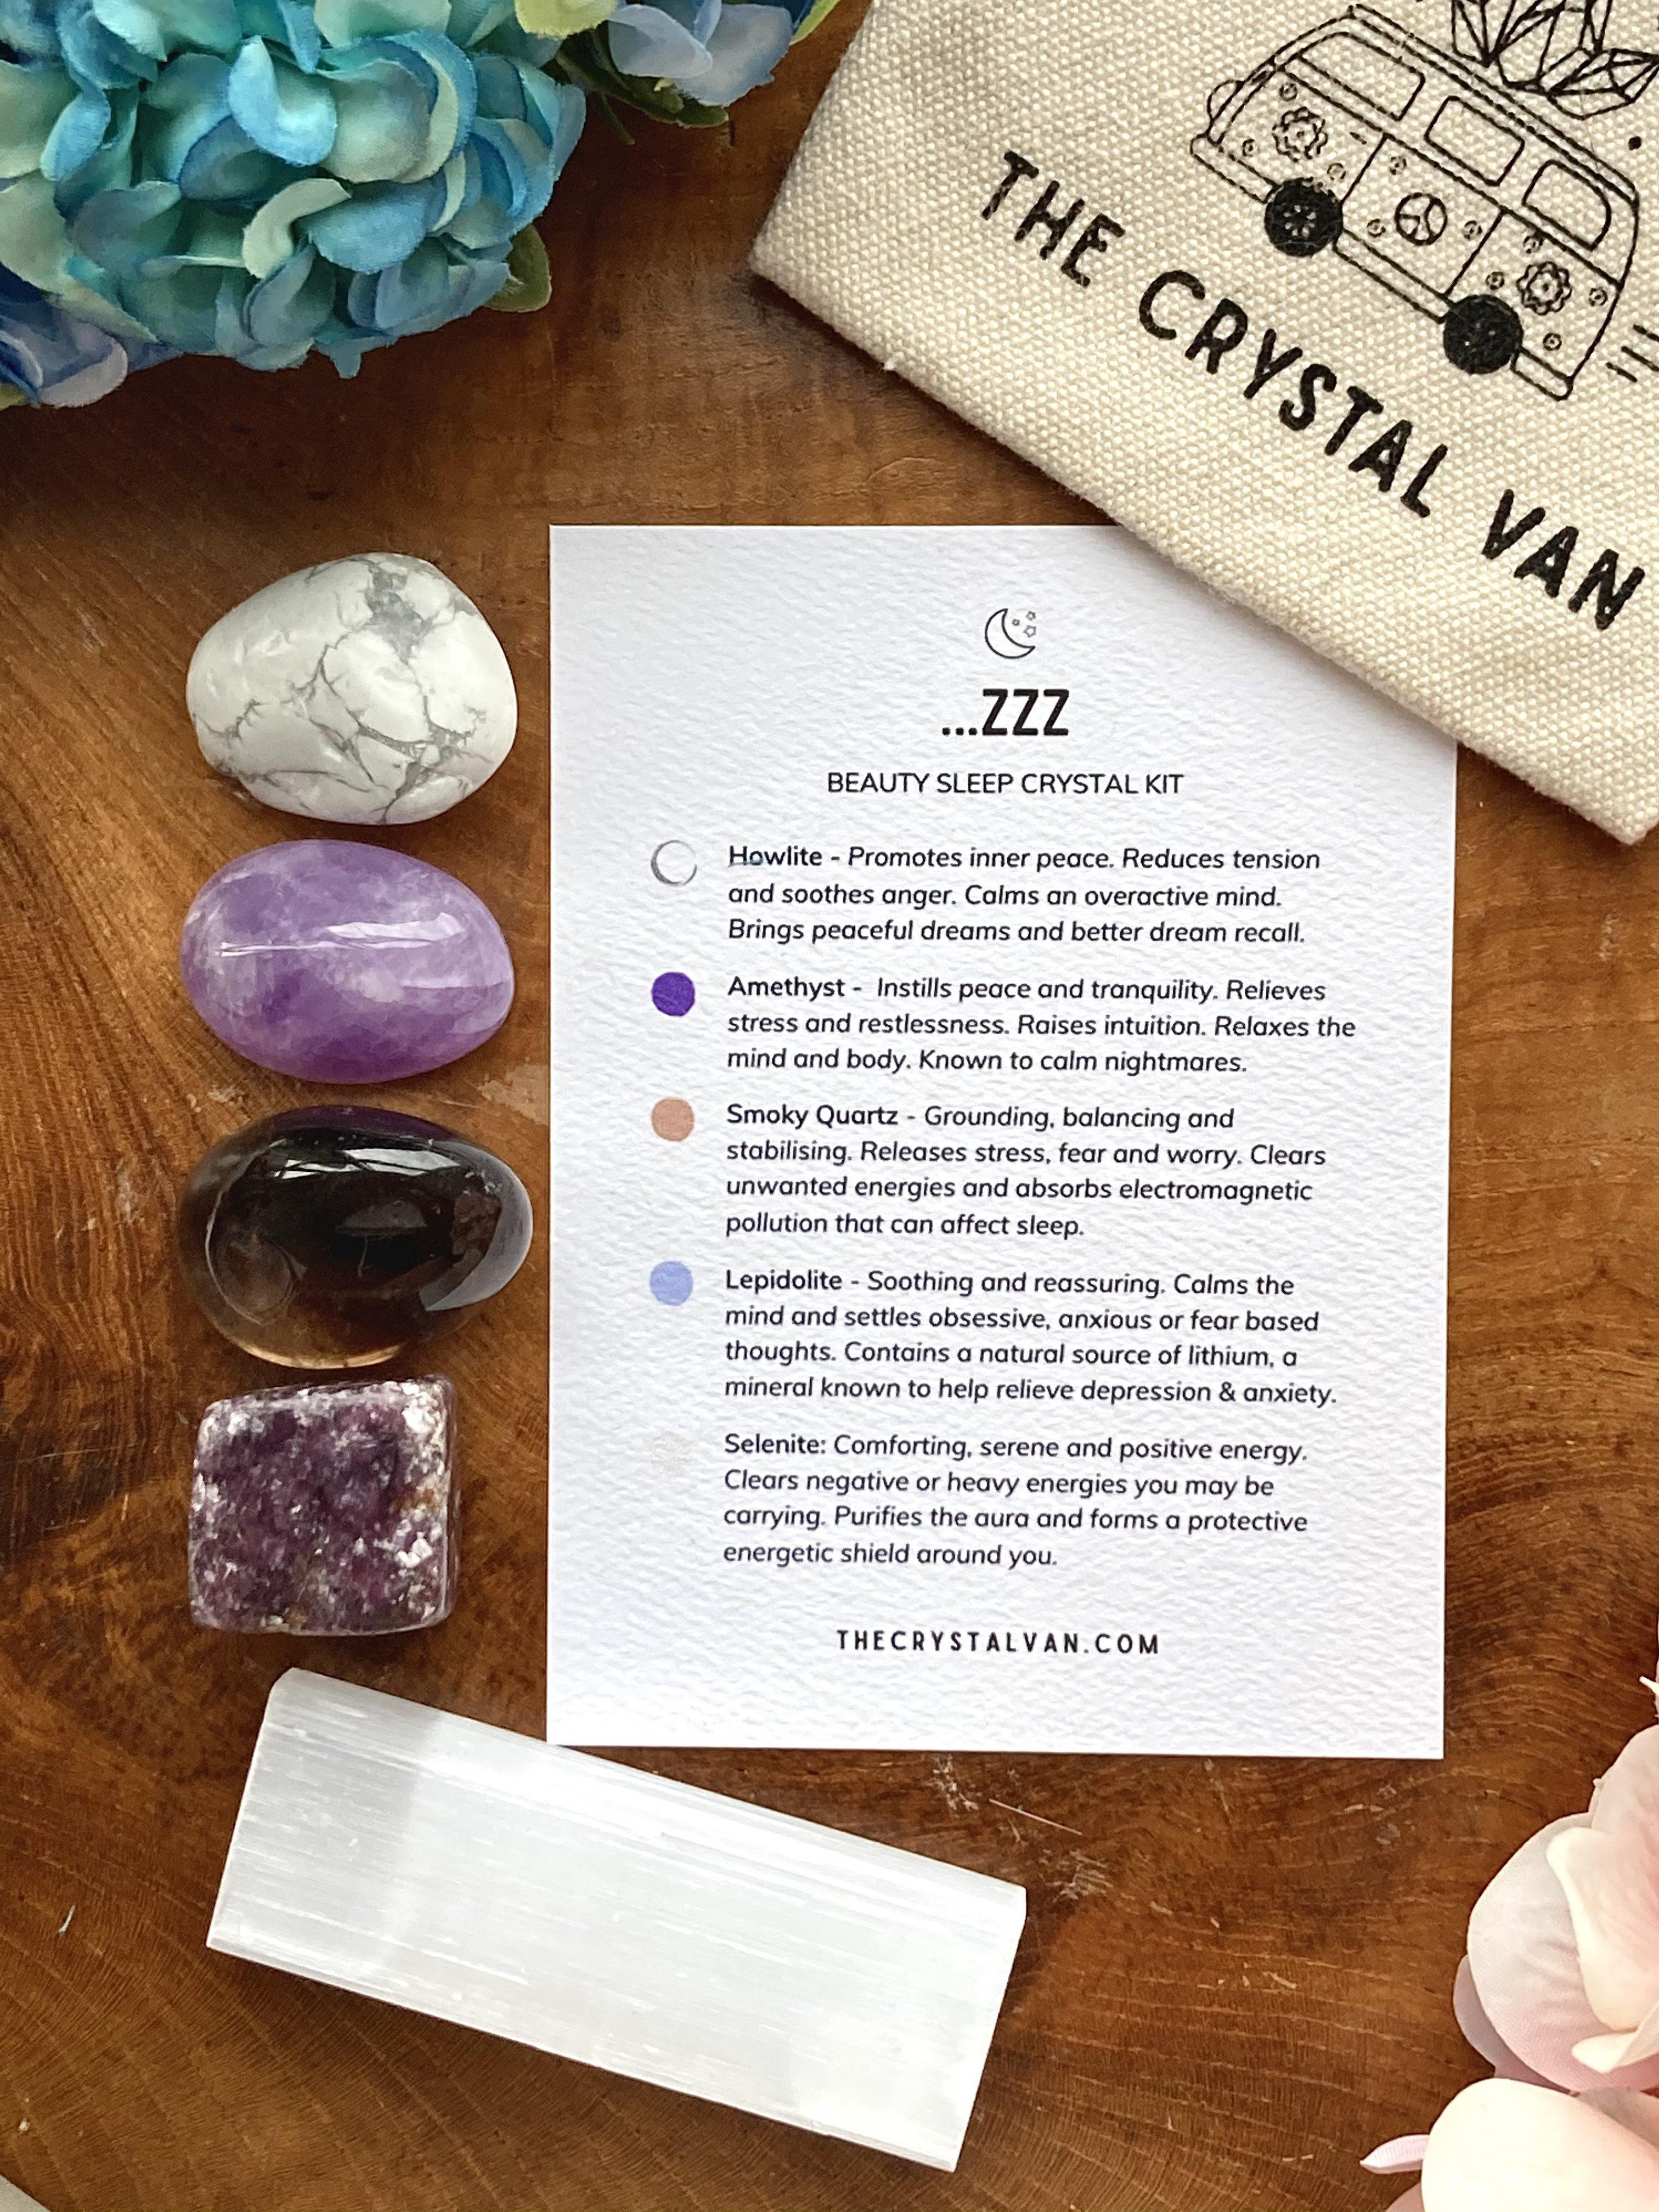 Introducing our Crystal Kits - thecrystalvan